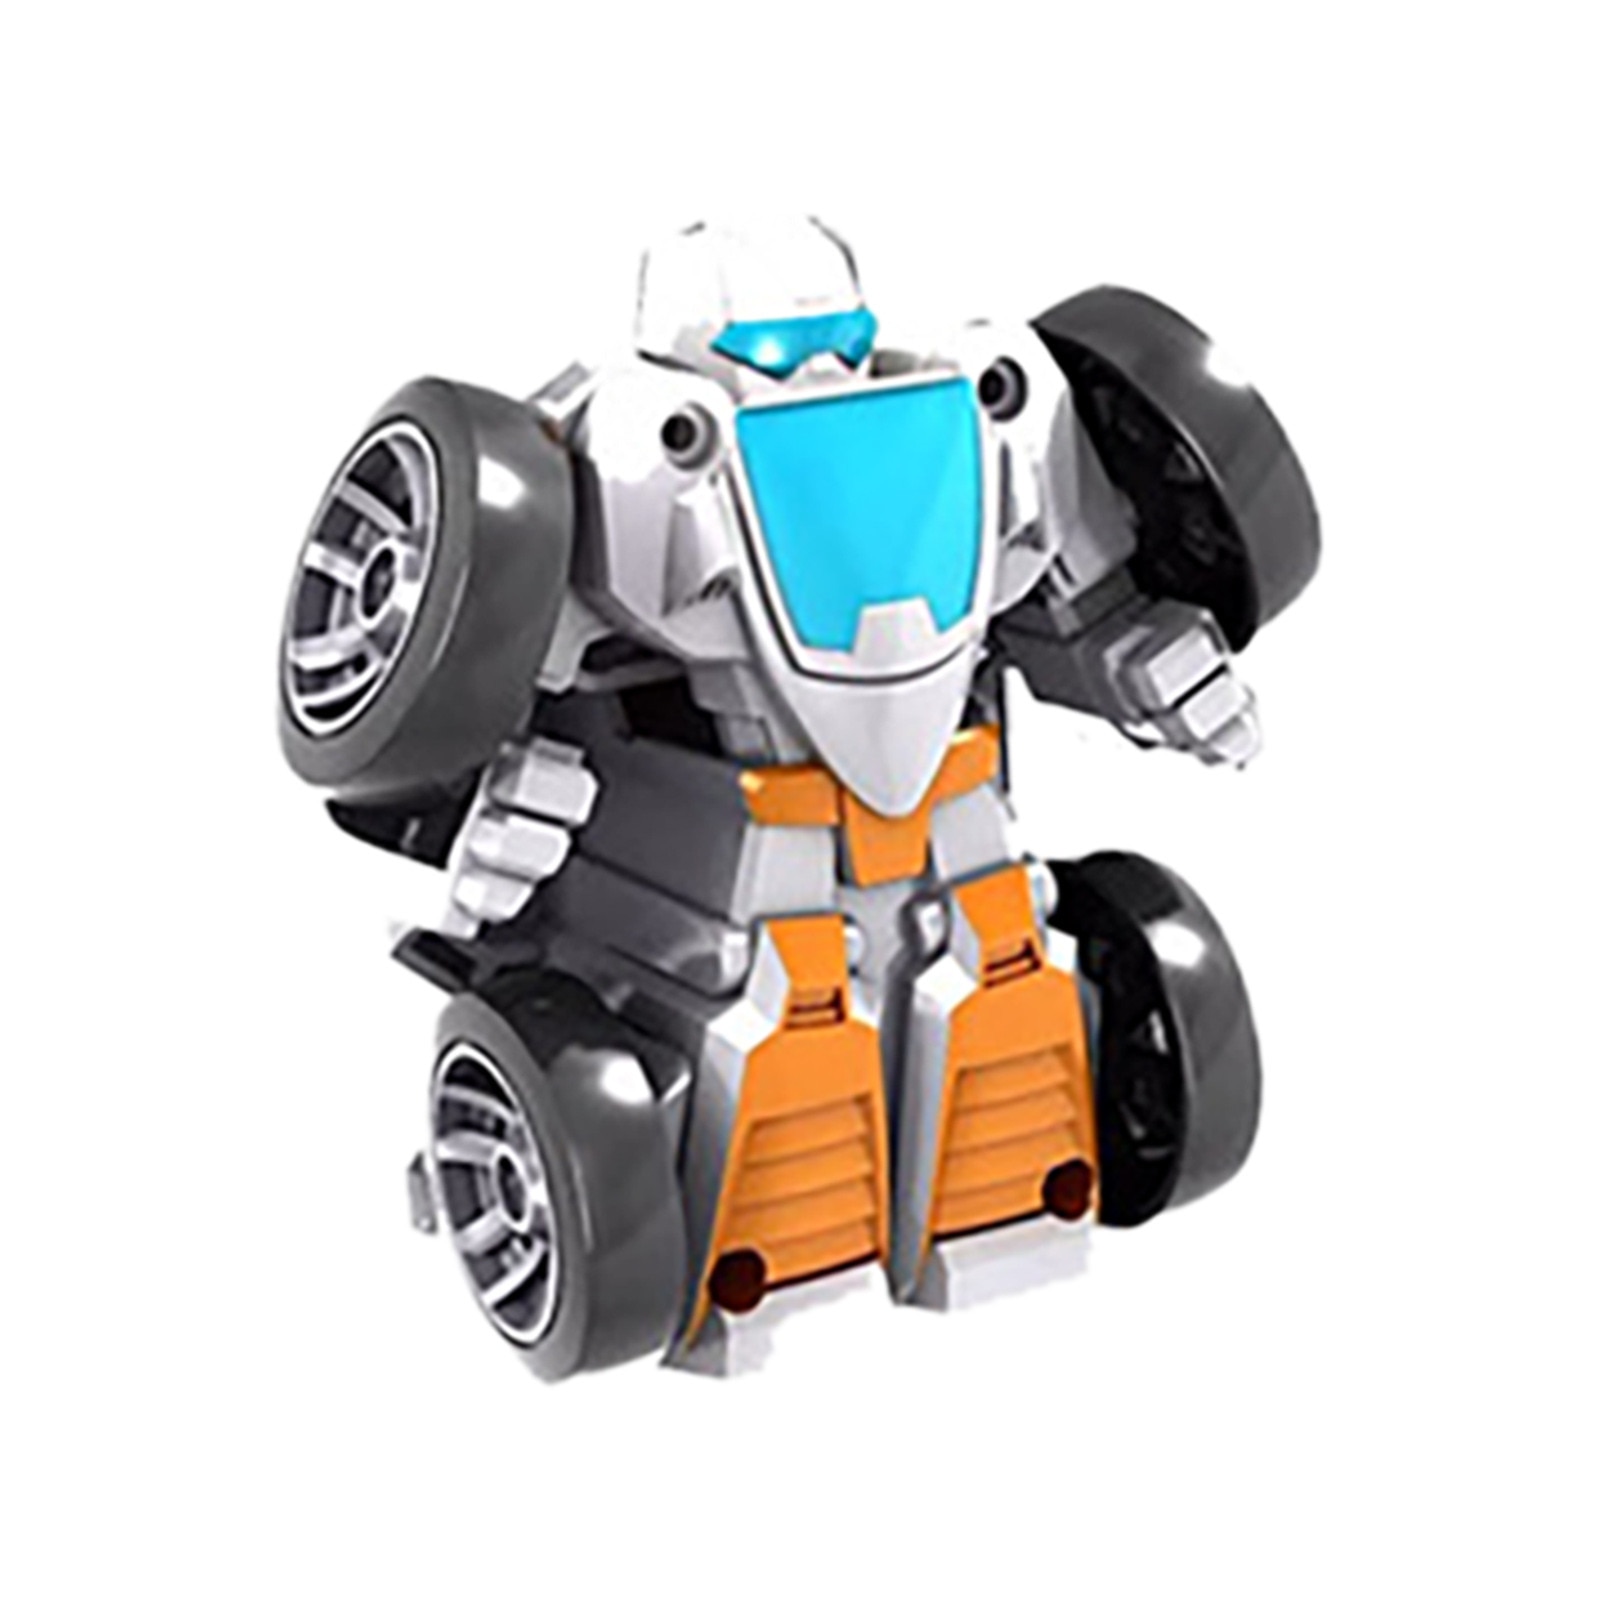 6CM Rescue Bots Car Toys Transformation Robot Action mini version deformation King Kong Figures Toys For Kids Baby Xmas Gift